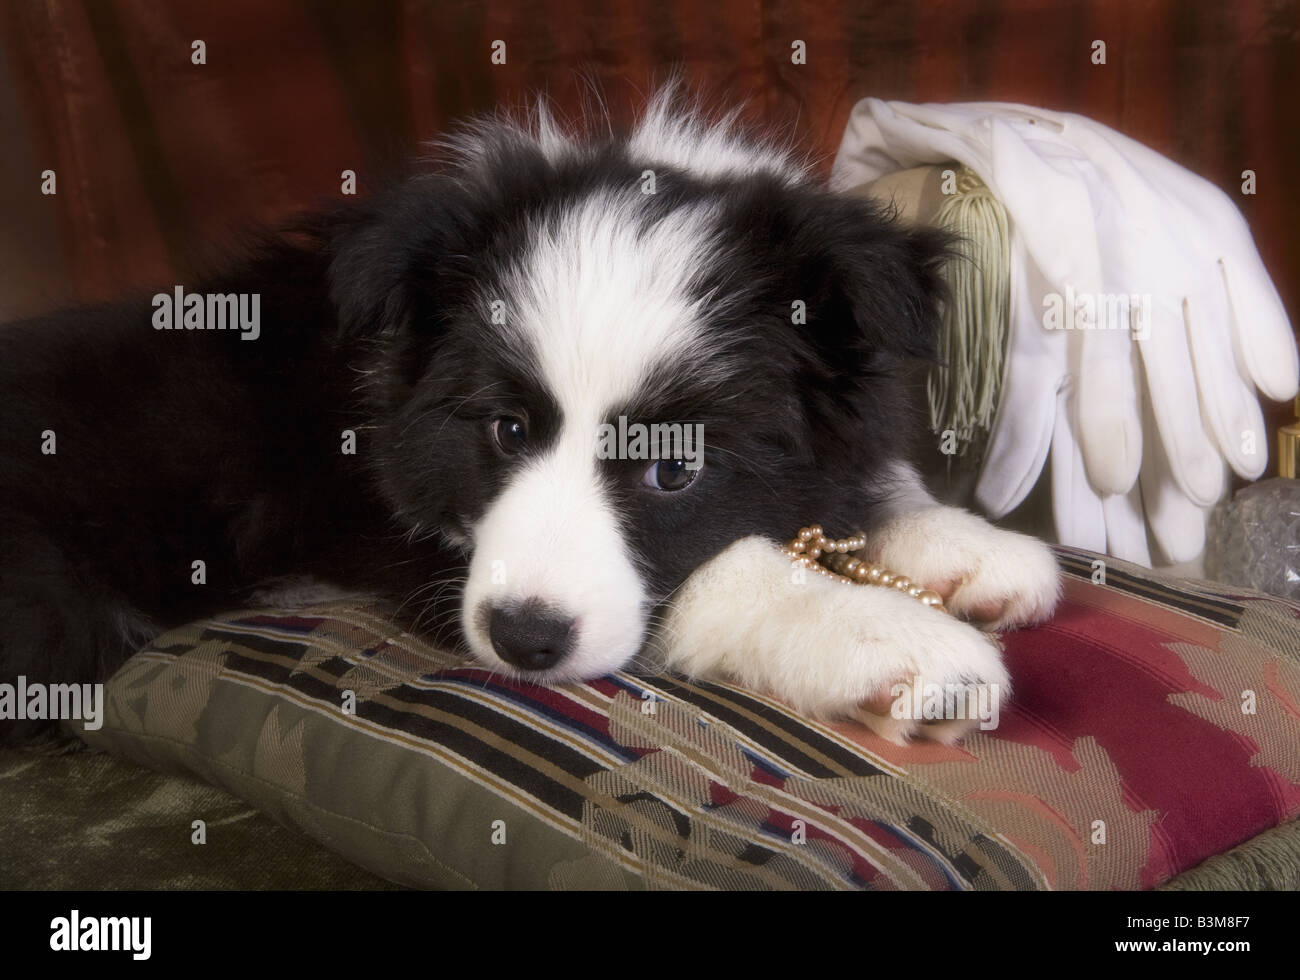 Border Collie puppy lying with vintage gloves and beads Stock Photo